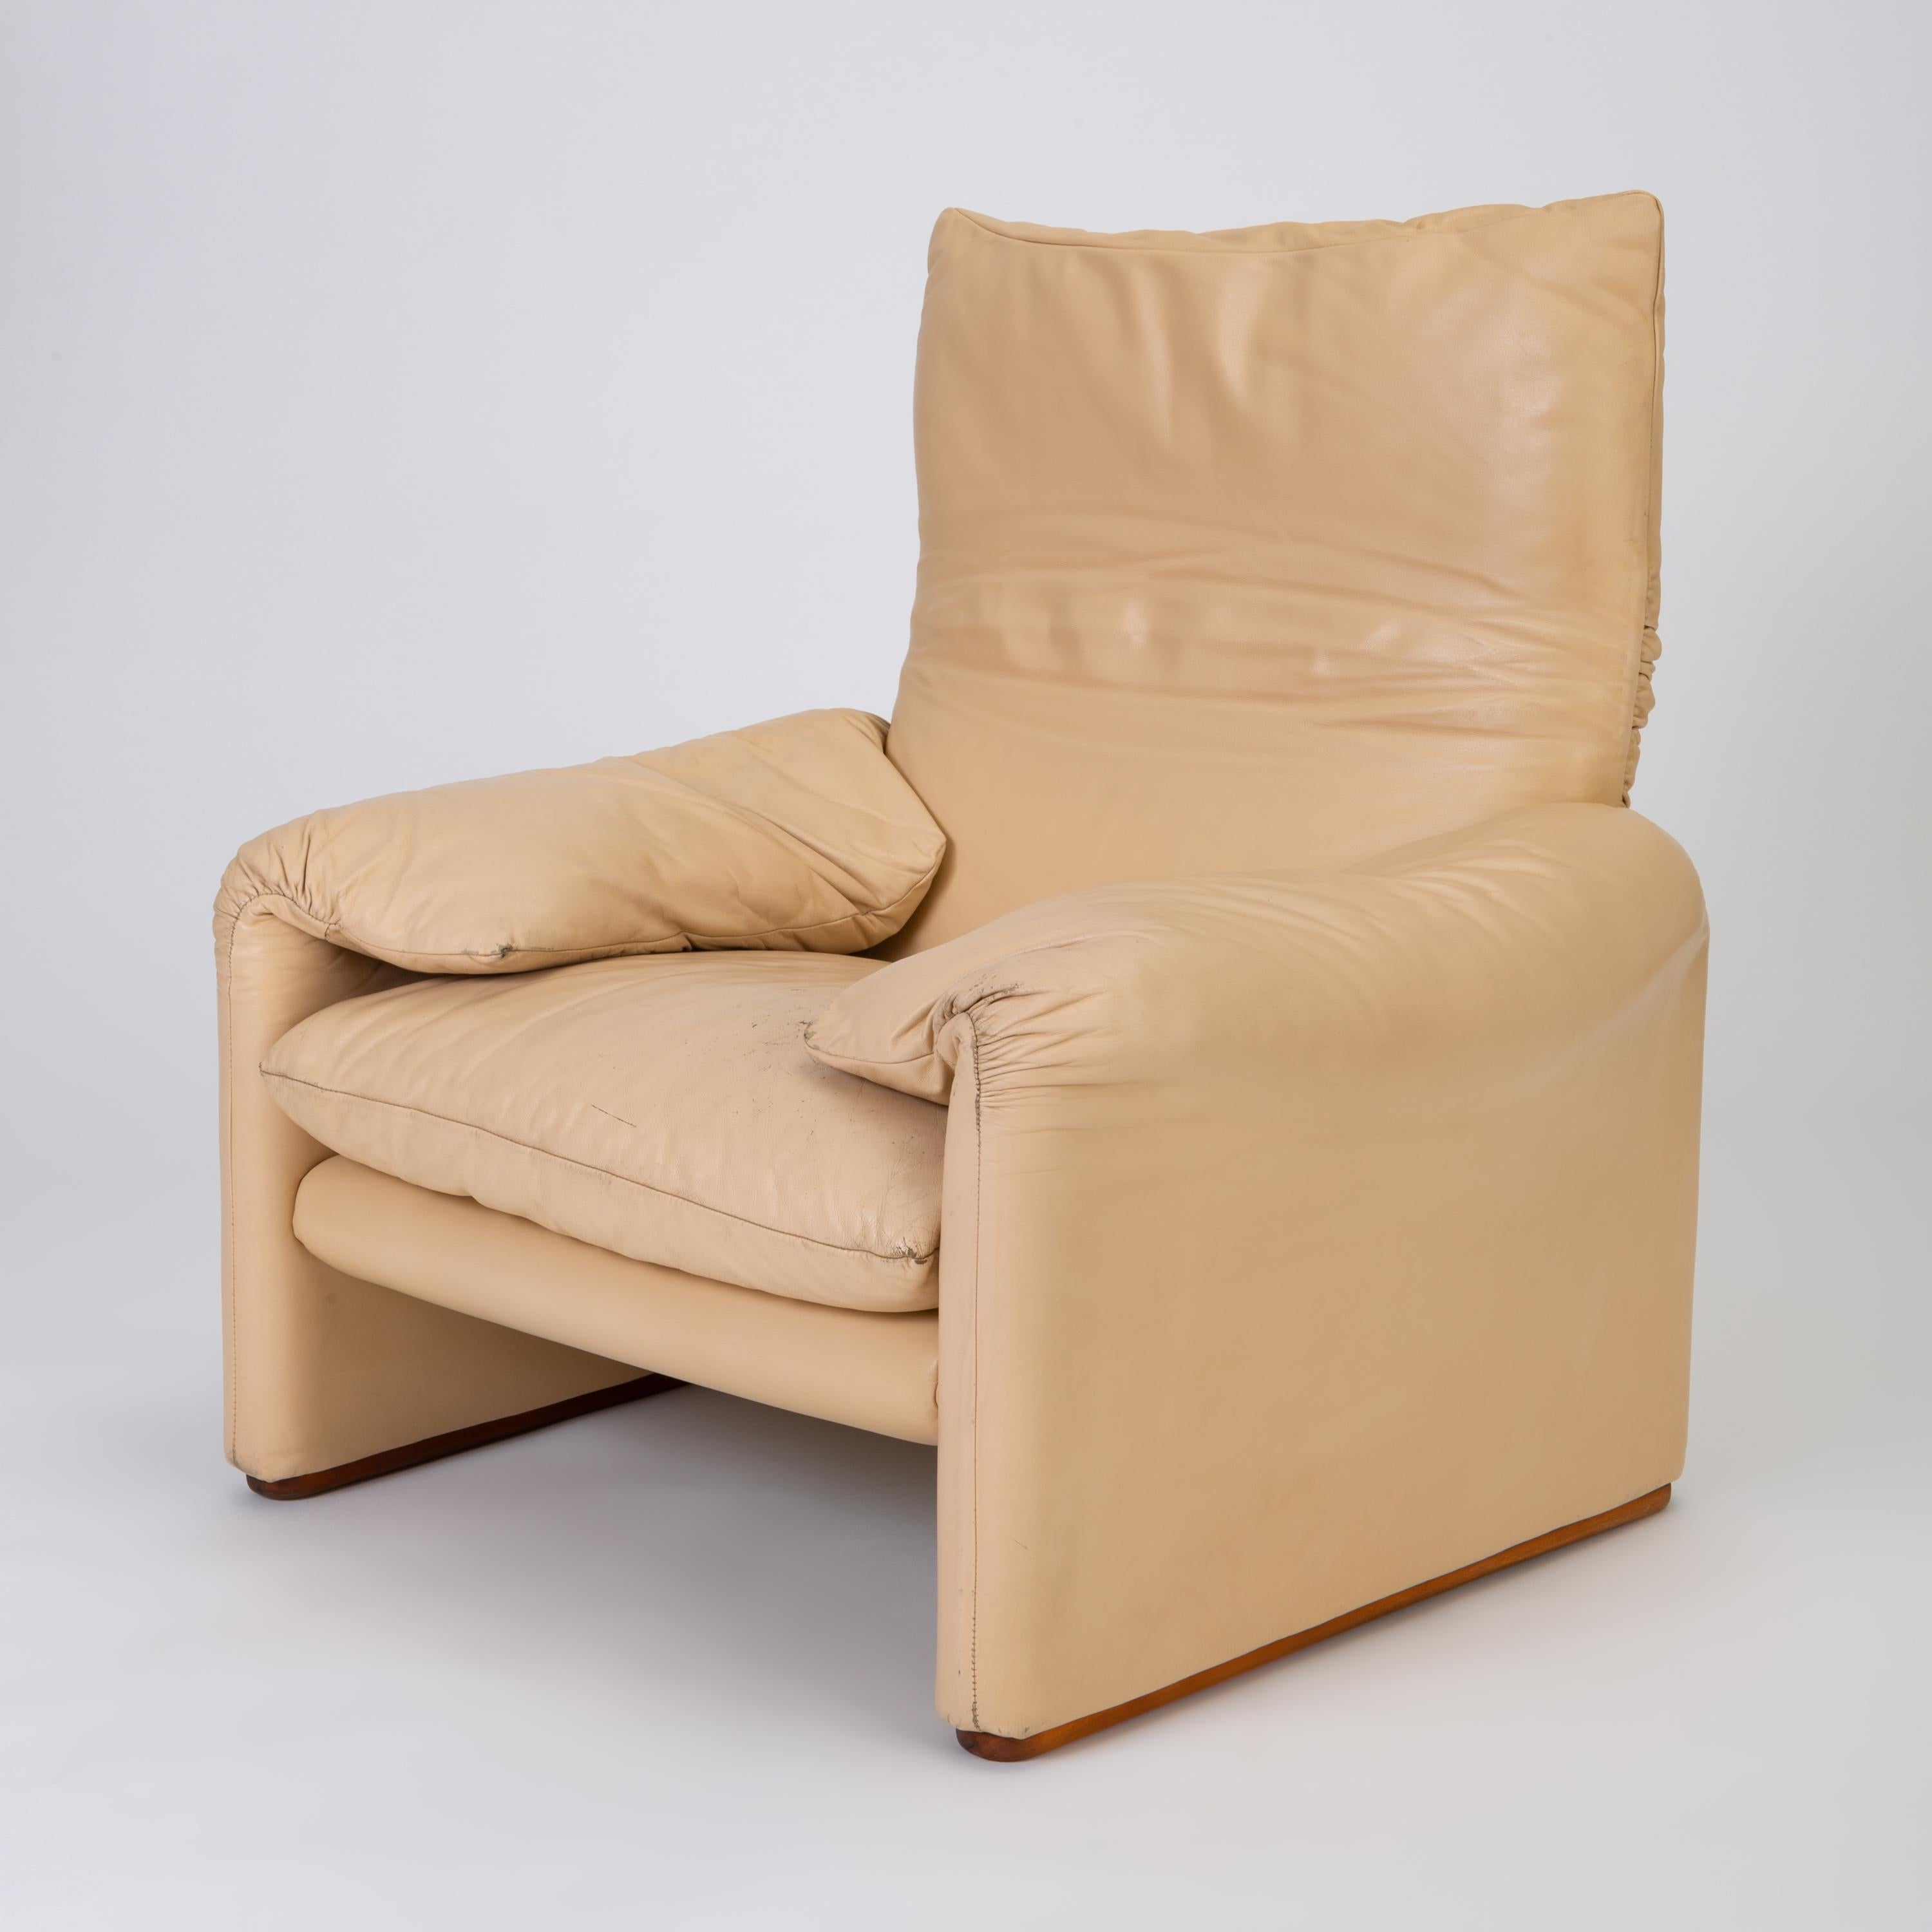 Leather “Maralunga” Chair by Vico Magistretti for Cassina 2